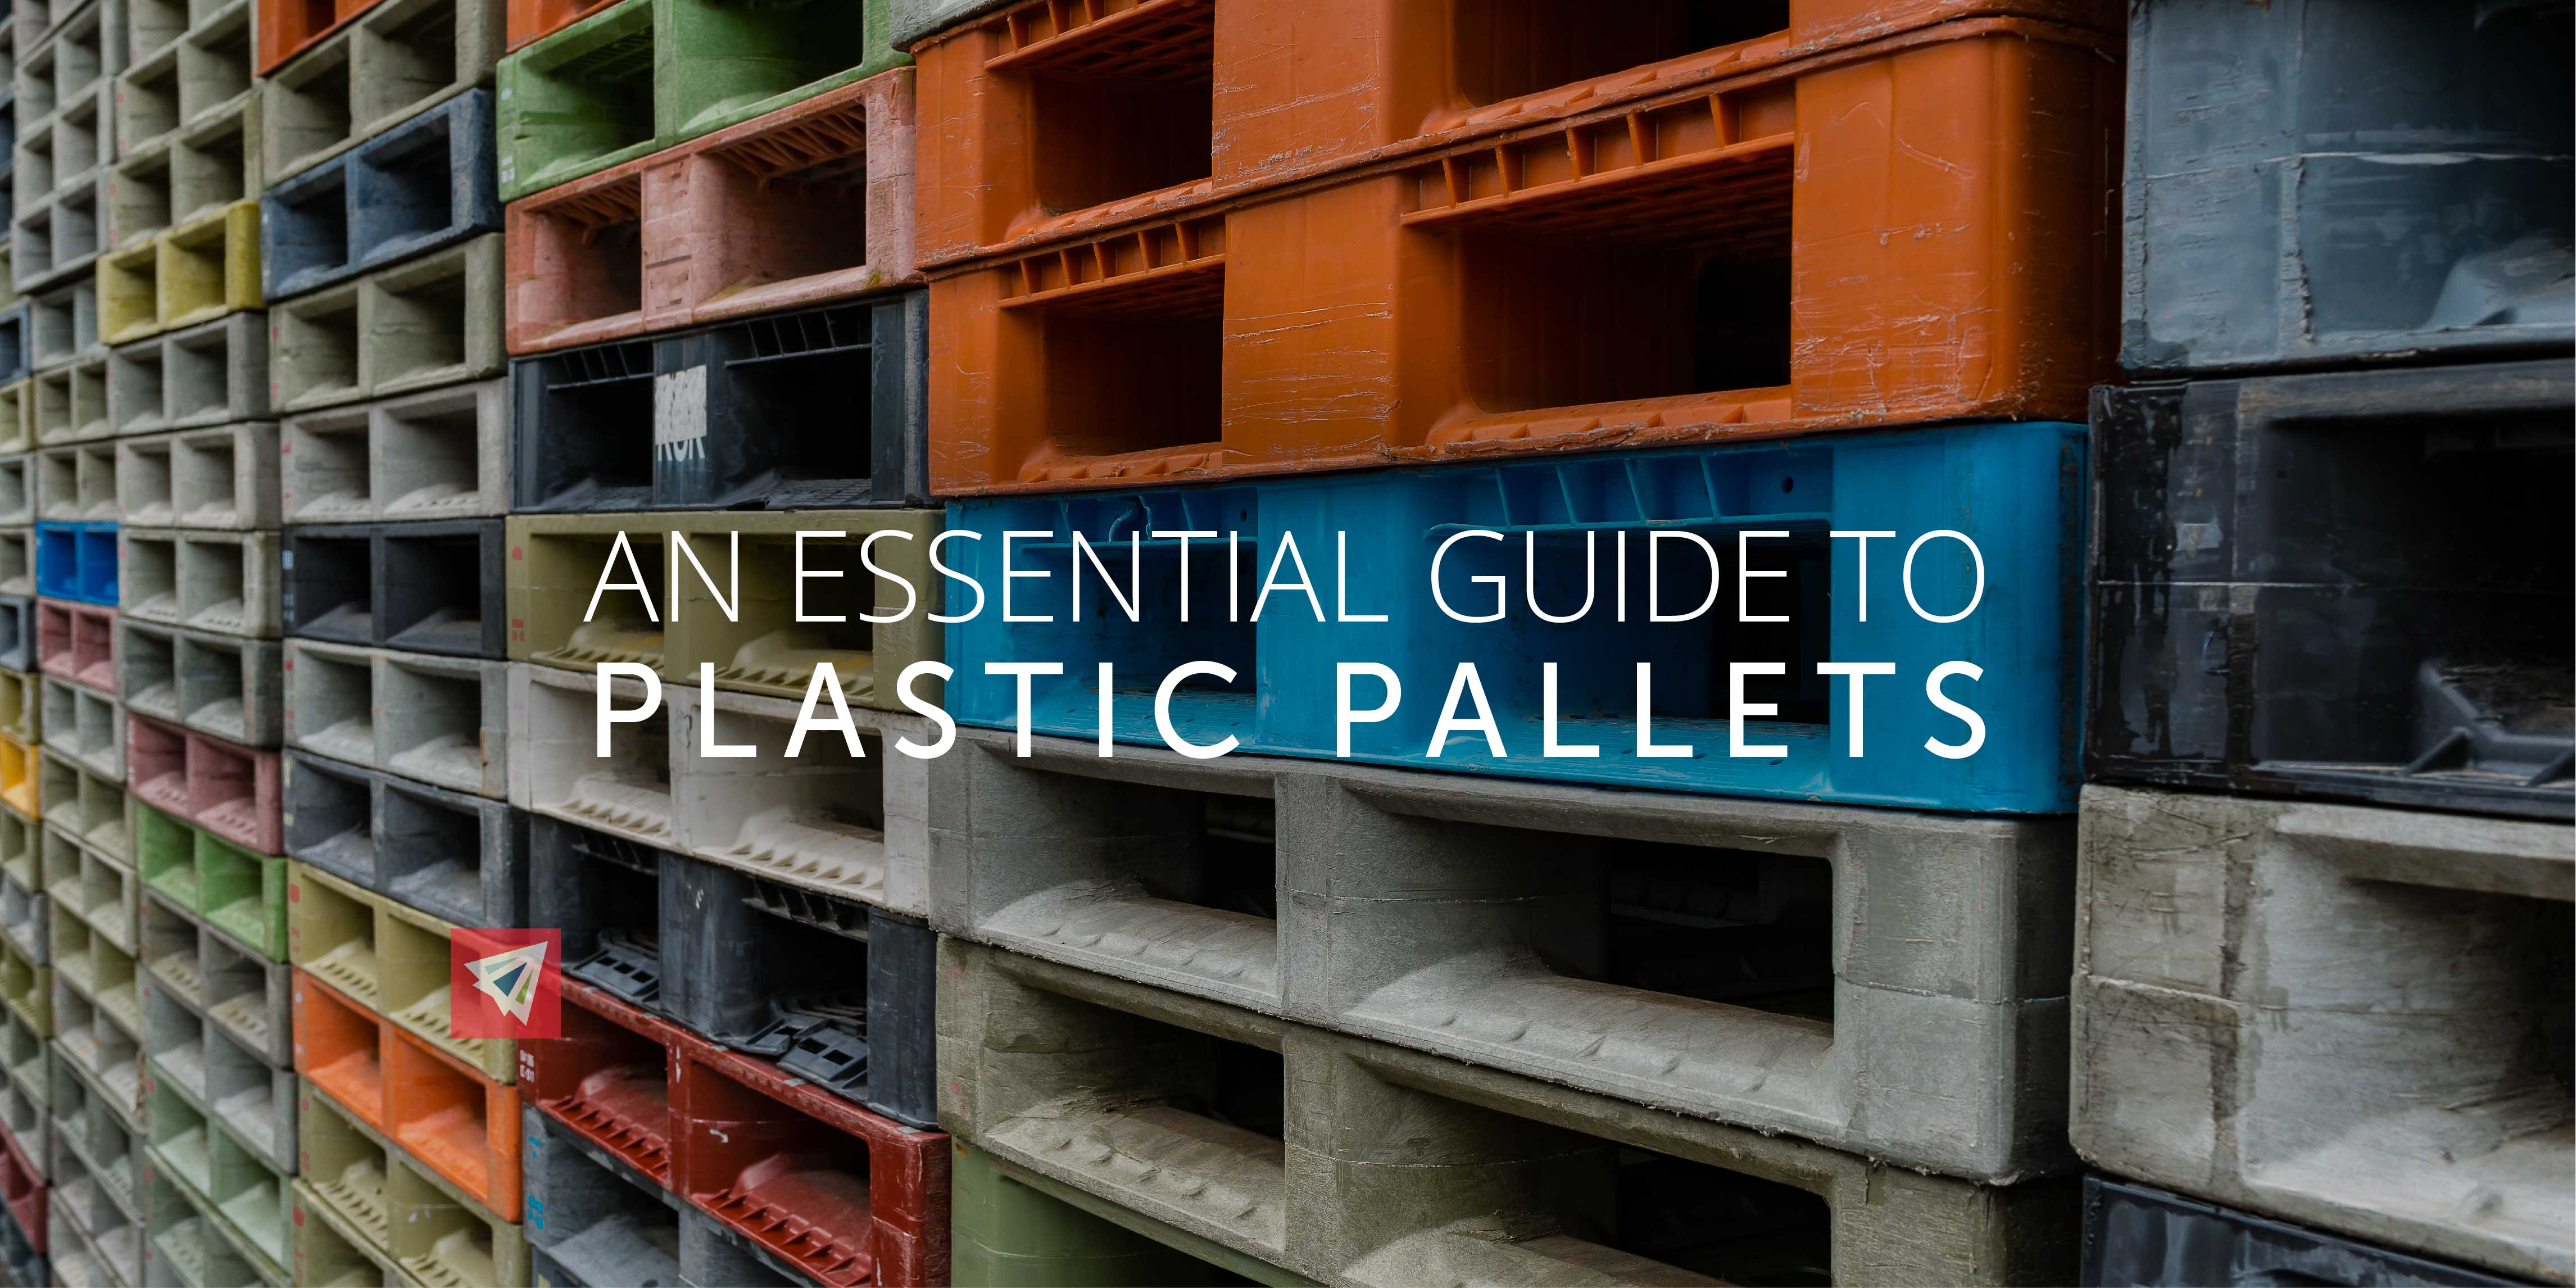 An Essential Guide to Plastic Pallets